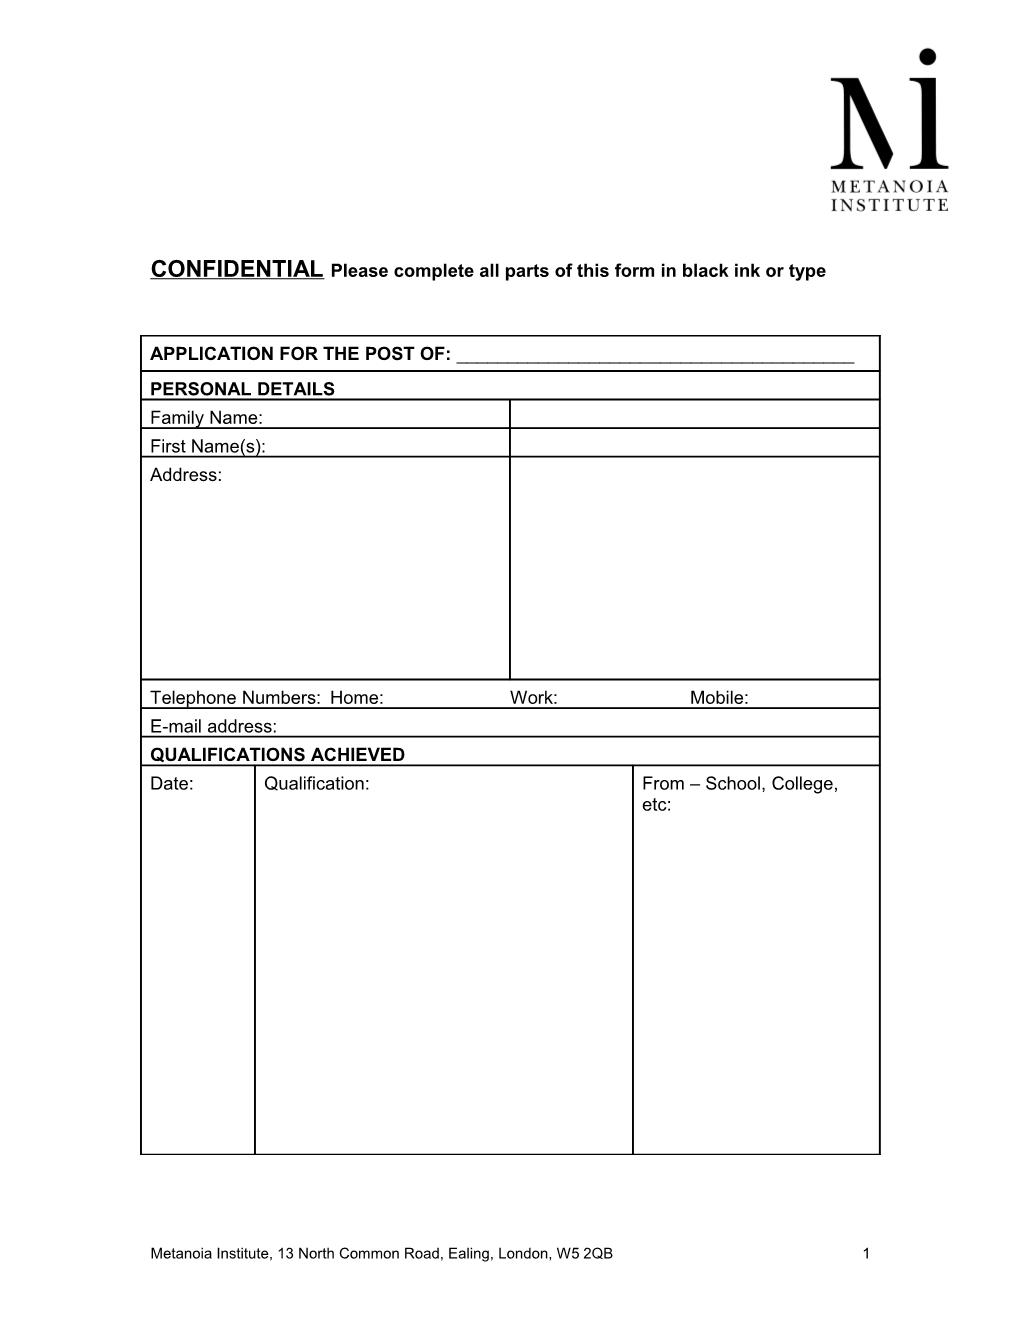 Confidentialplease Complete All Parts of This Form in Black Ink Or Type